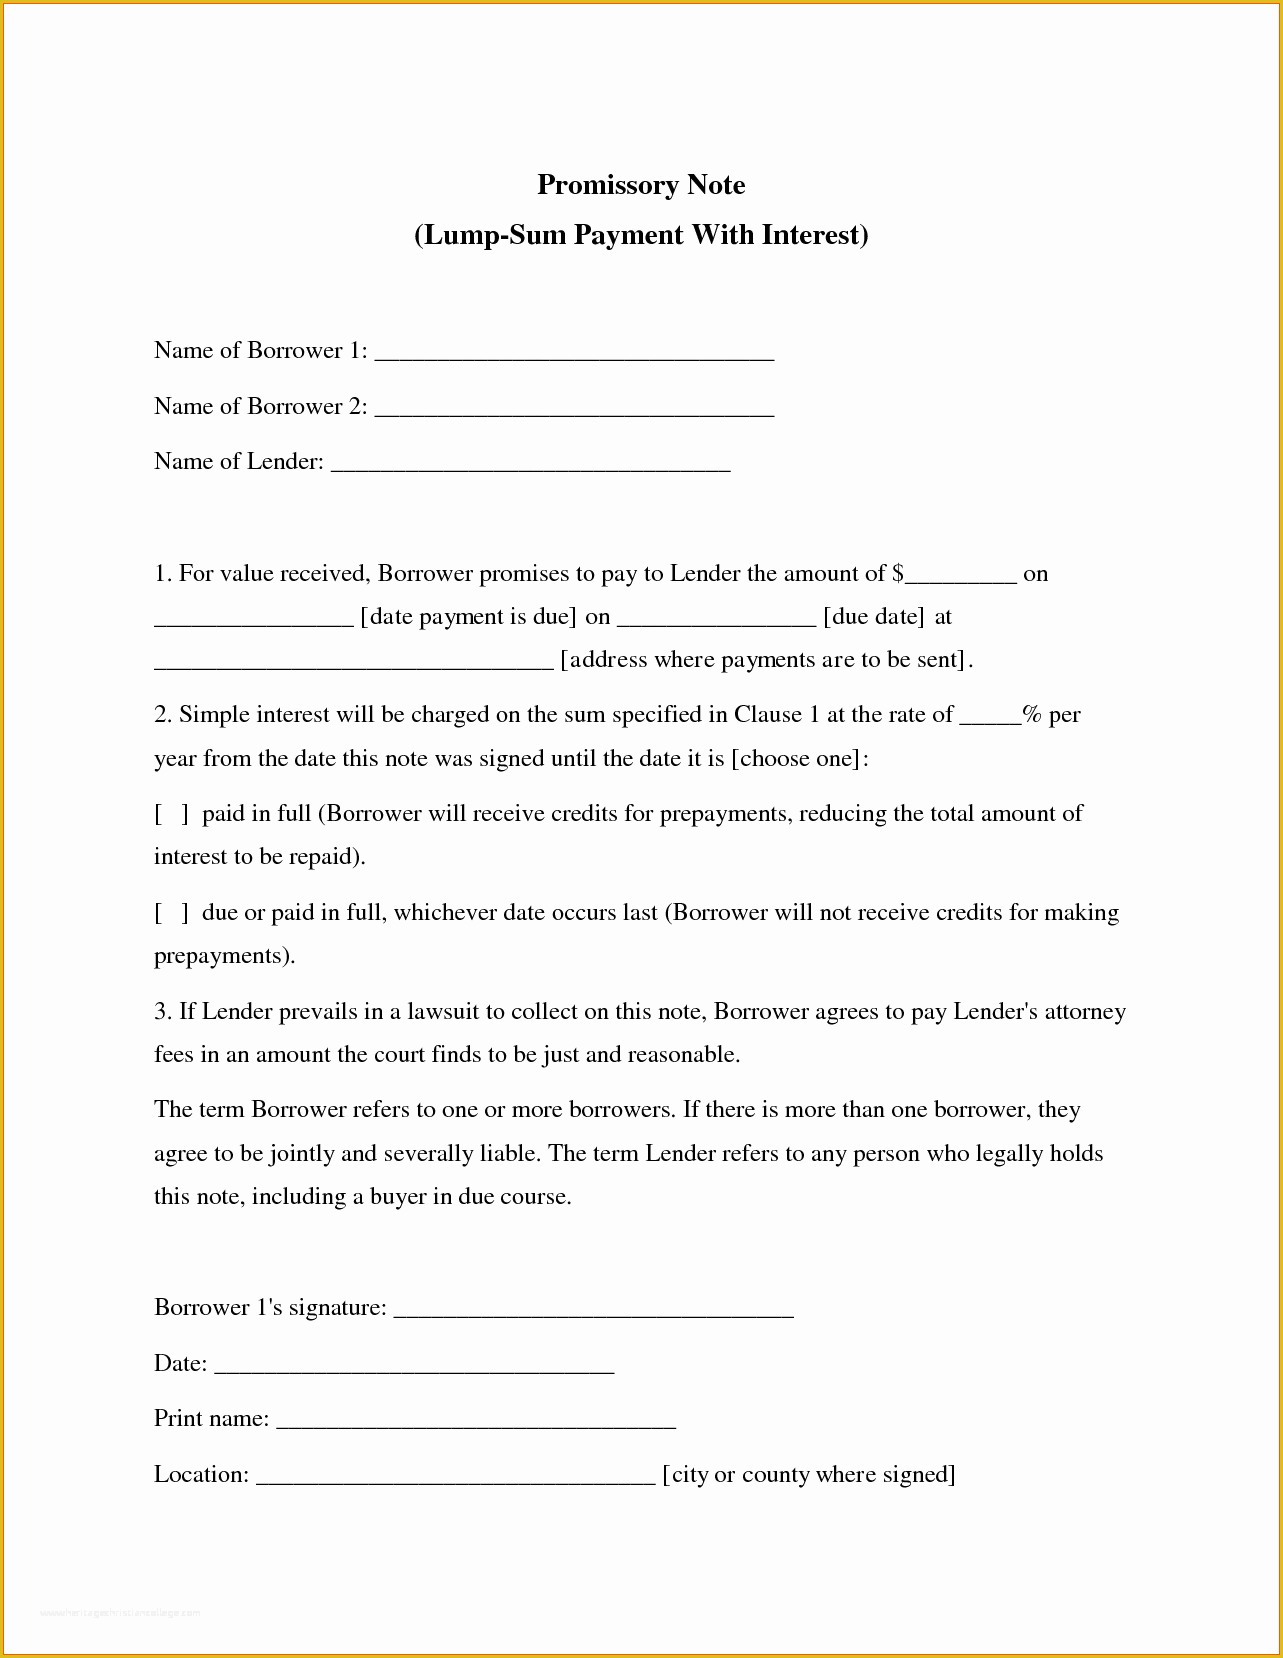 Free Promissory Note Template for A Vehicle Of Beaufiful Free Promissory Note Template for Personal